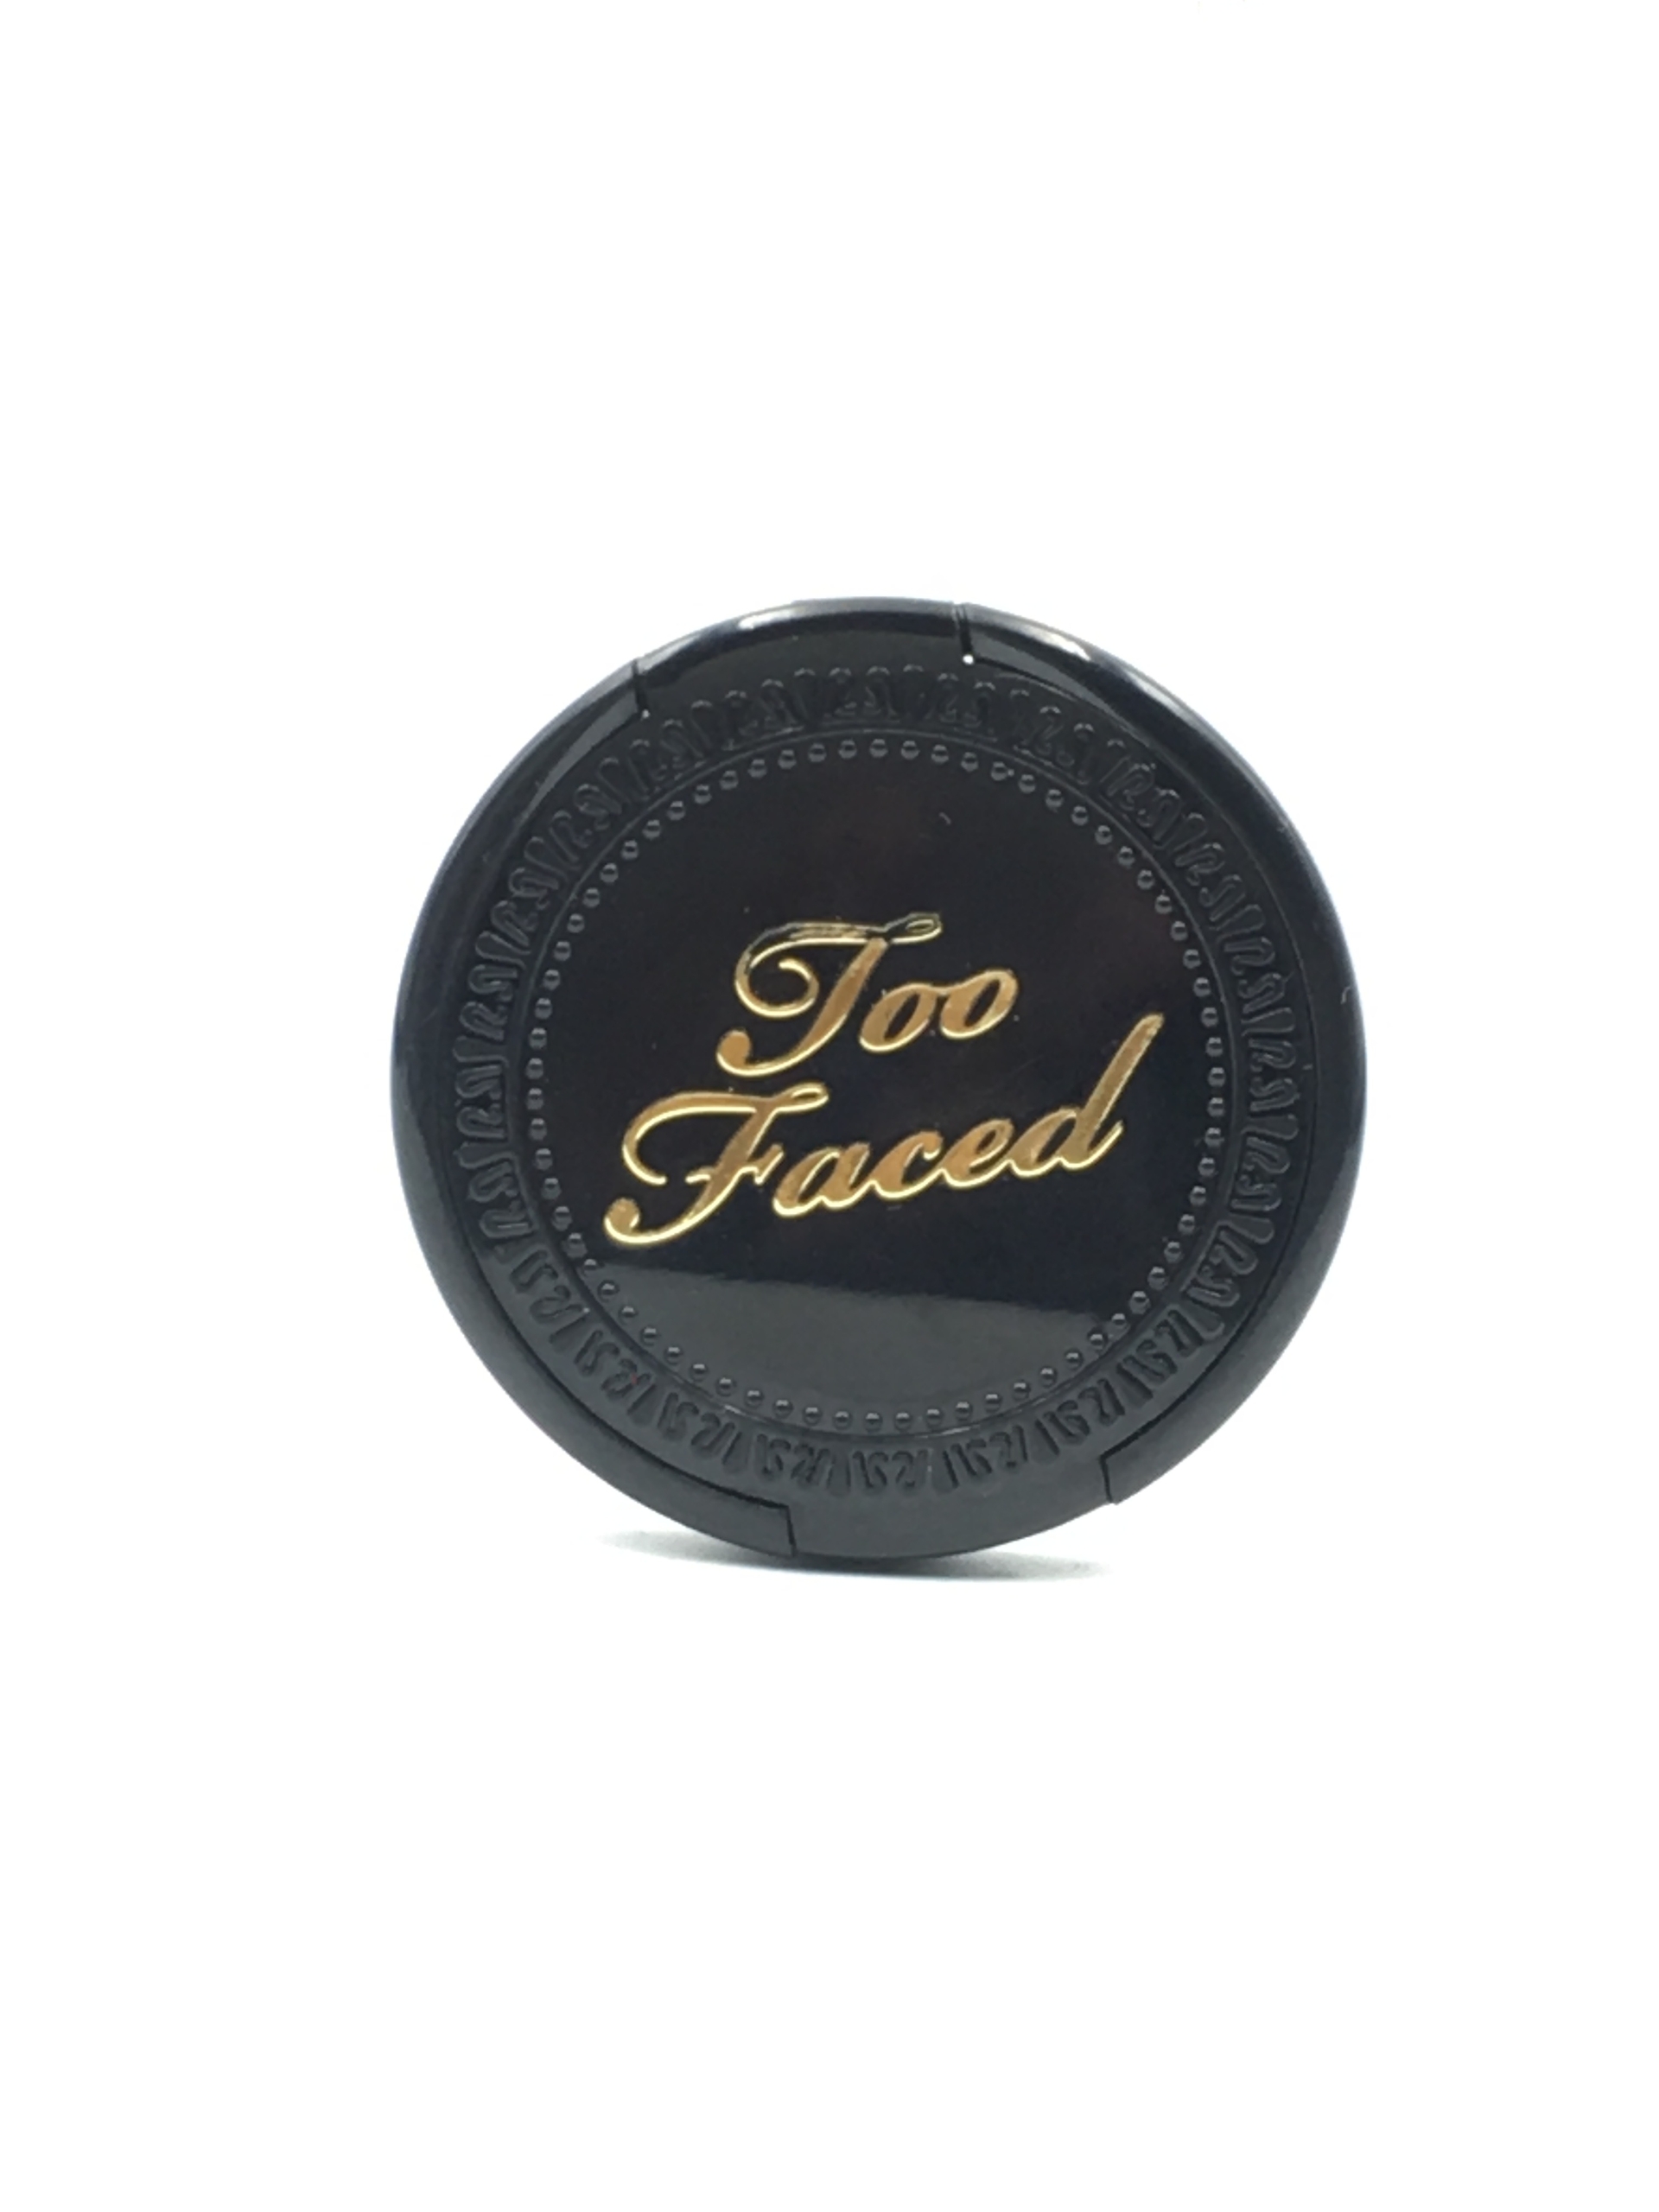 Too Faced candlelight Glow Highlighting Powder Dou